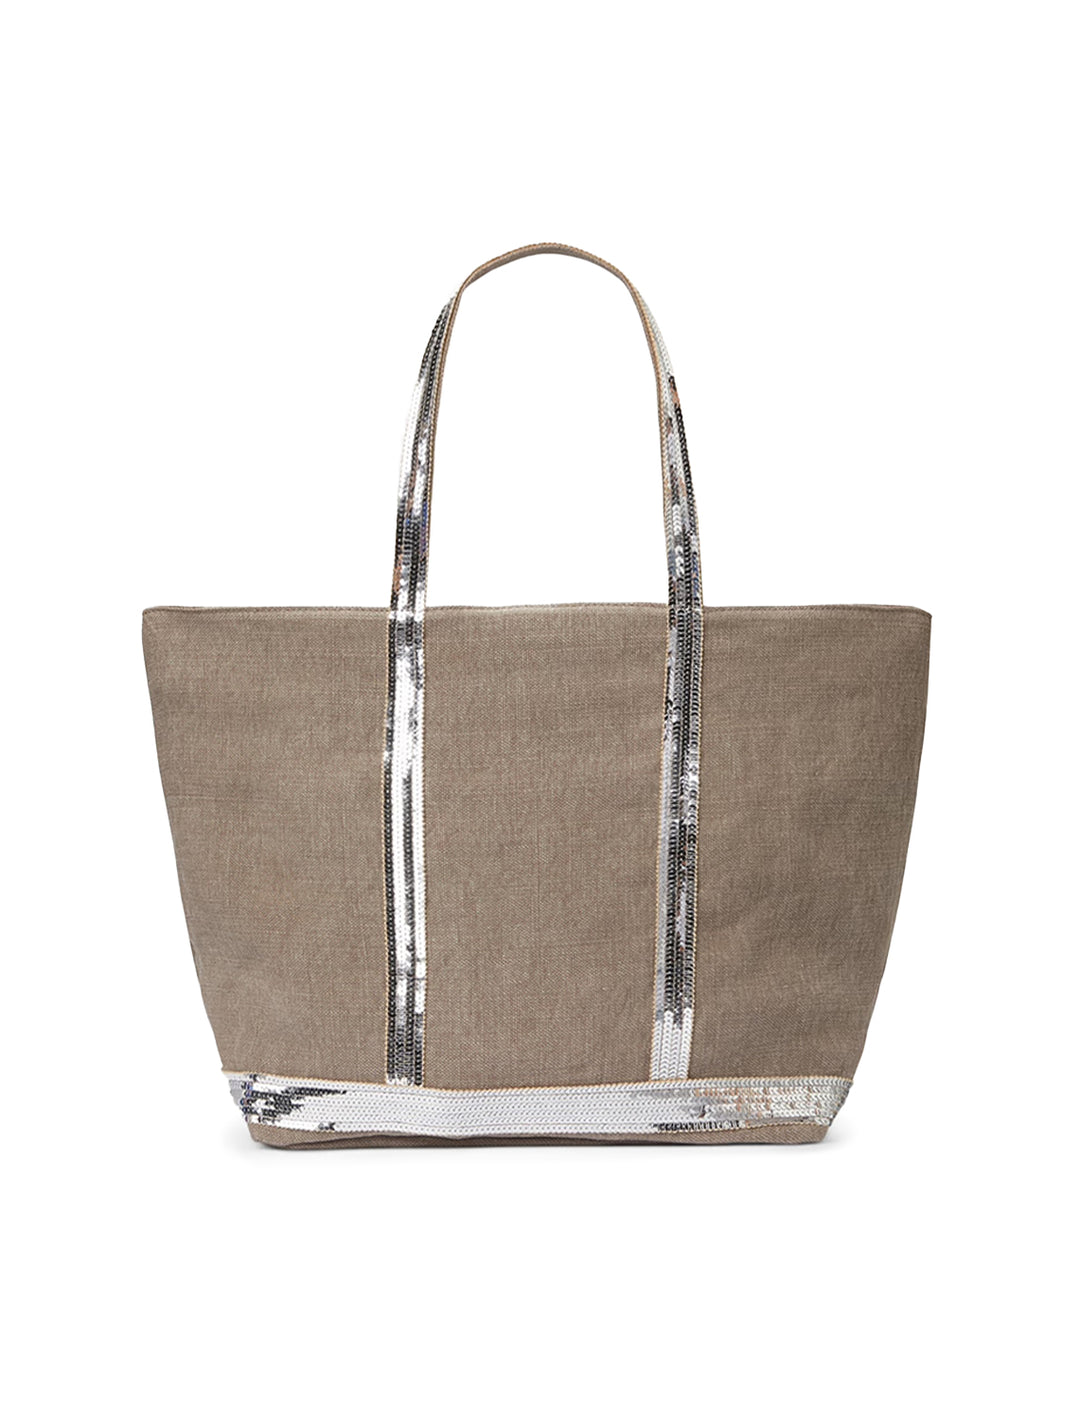 Front view of Vanessa Bruno's cabas large tote in calcaire.